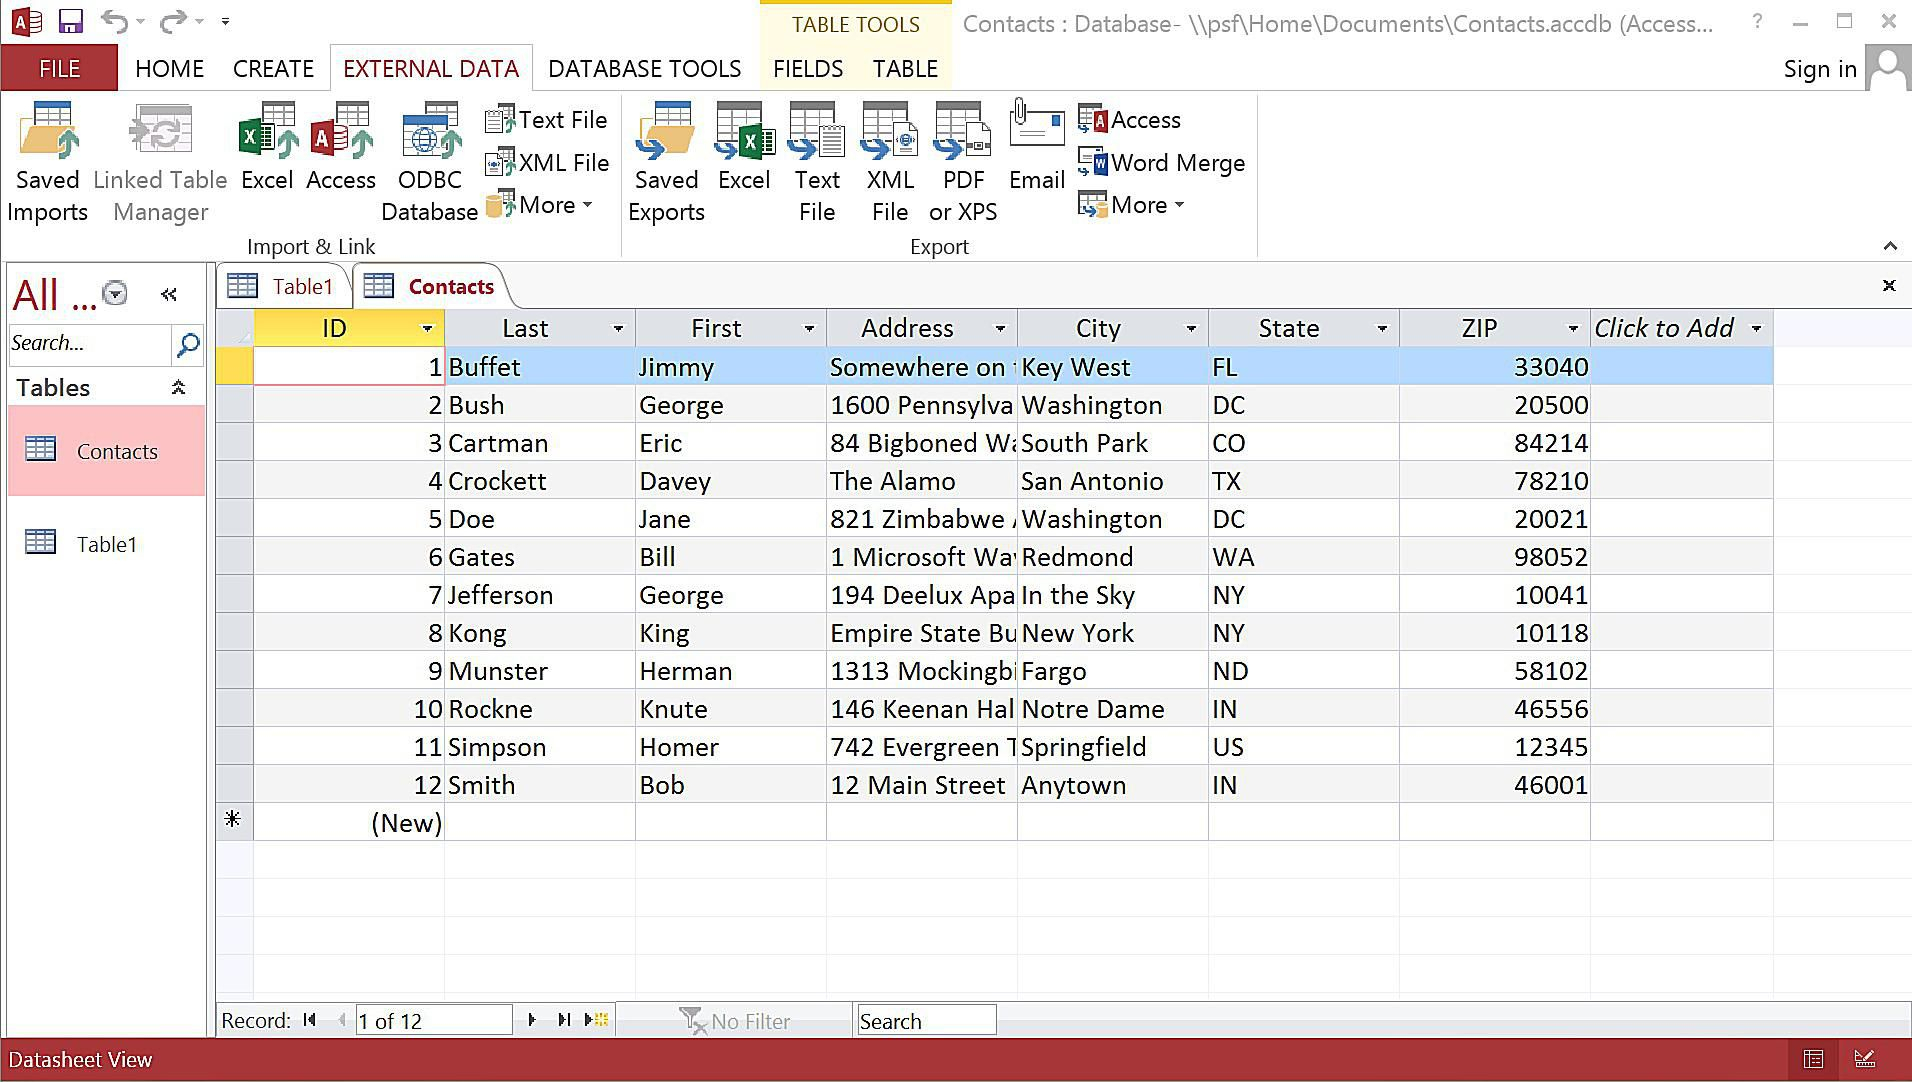 Convert Excel Spreadsheet To Access Database 2013 With Converting An Excel Spreadsheet To Access 2013 Database